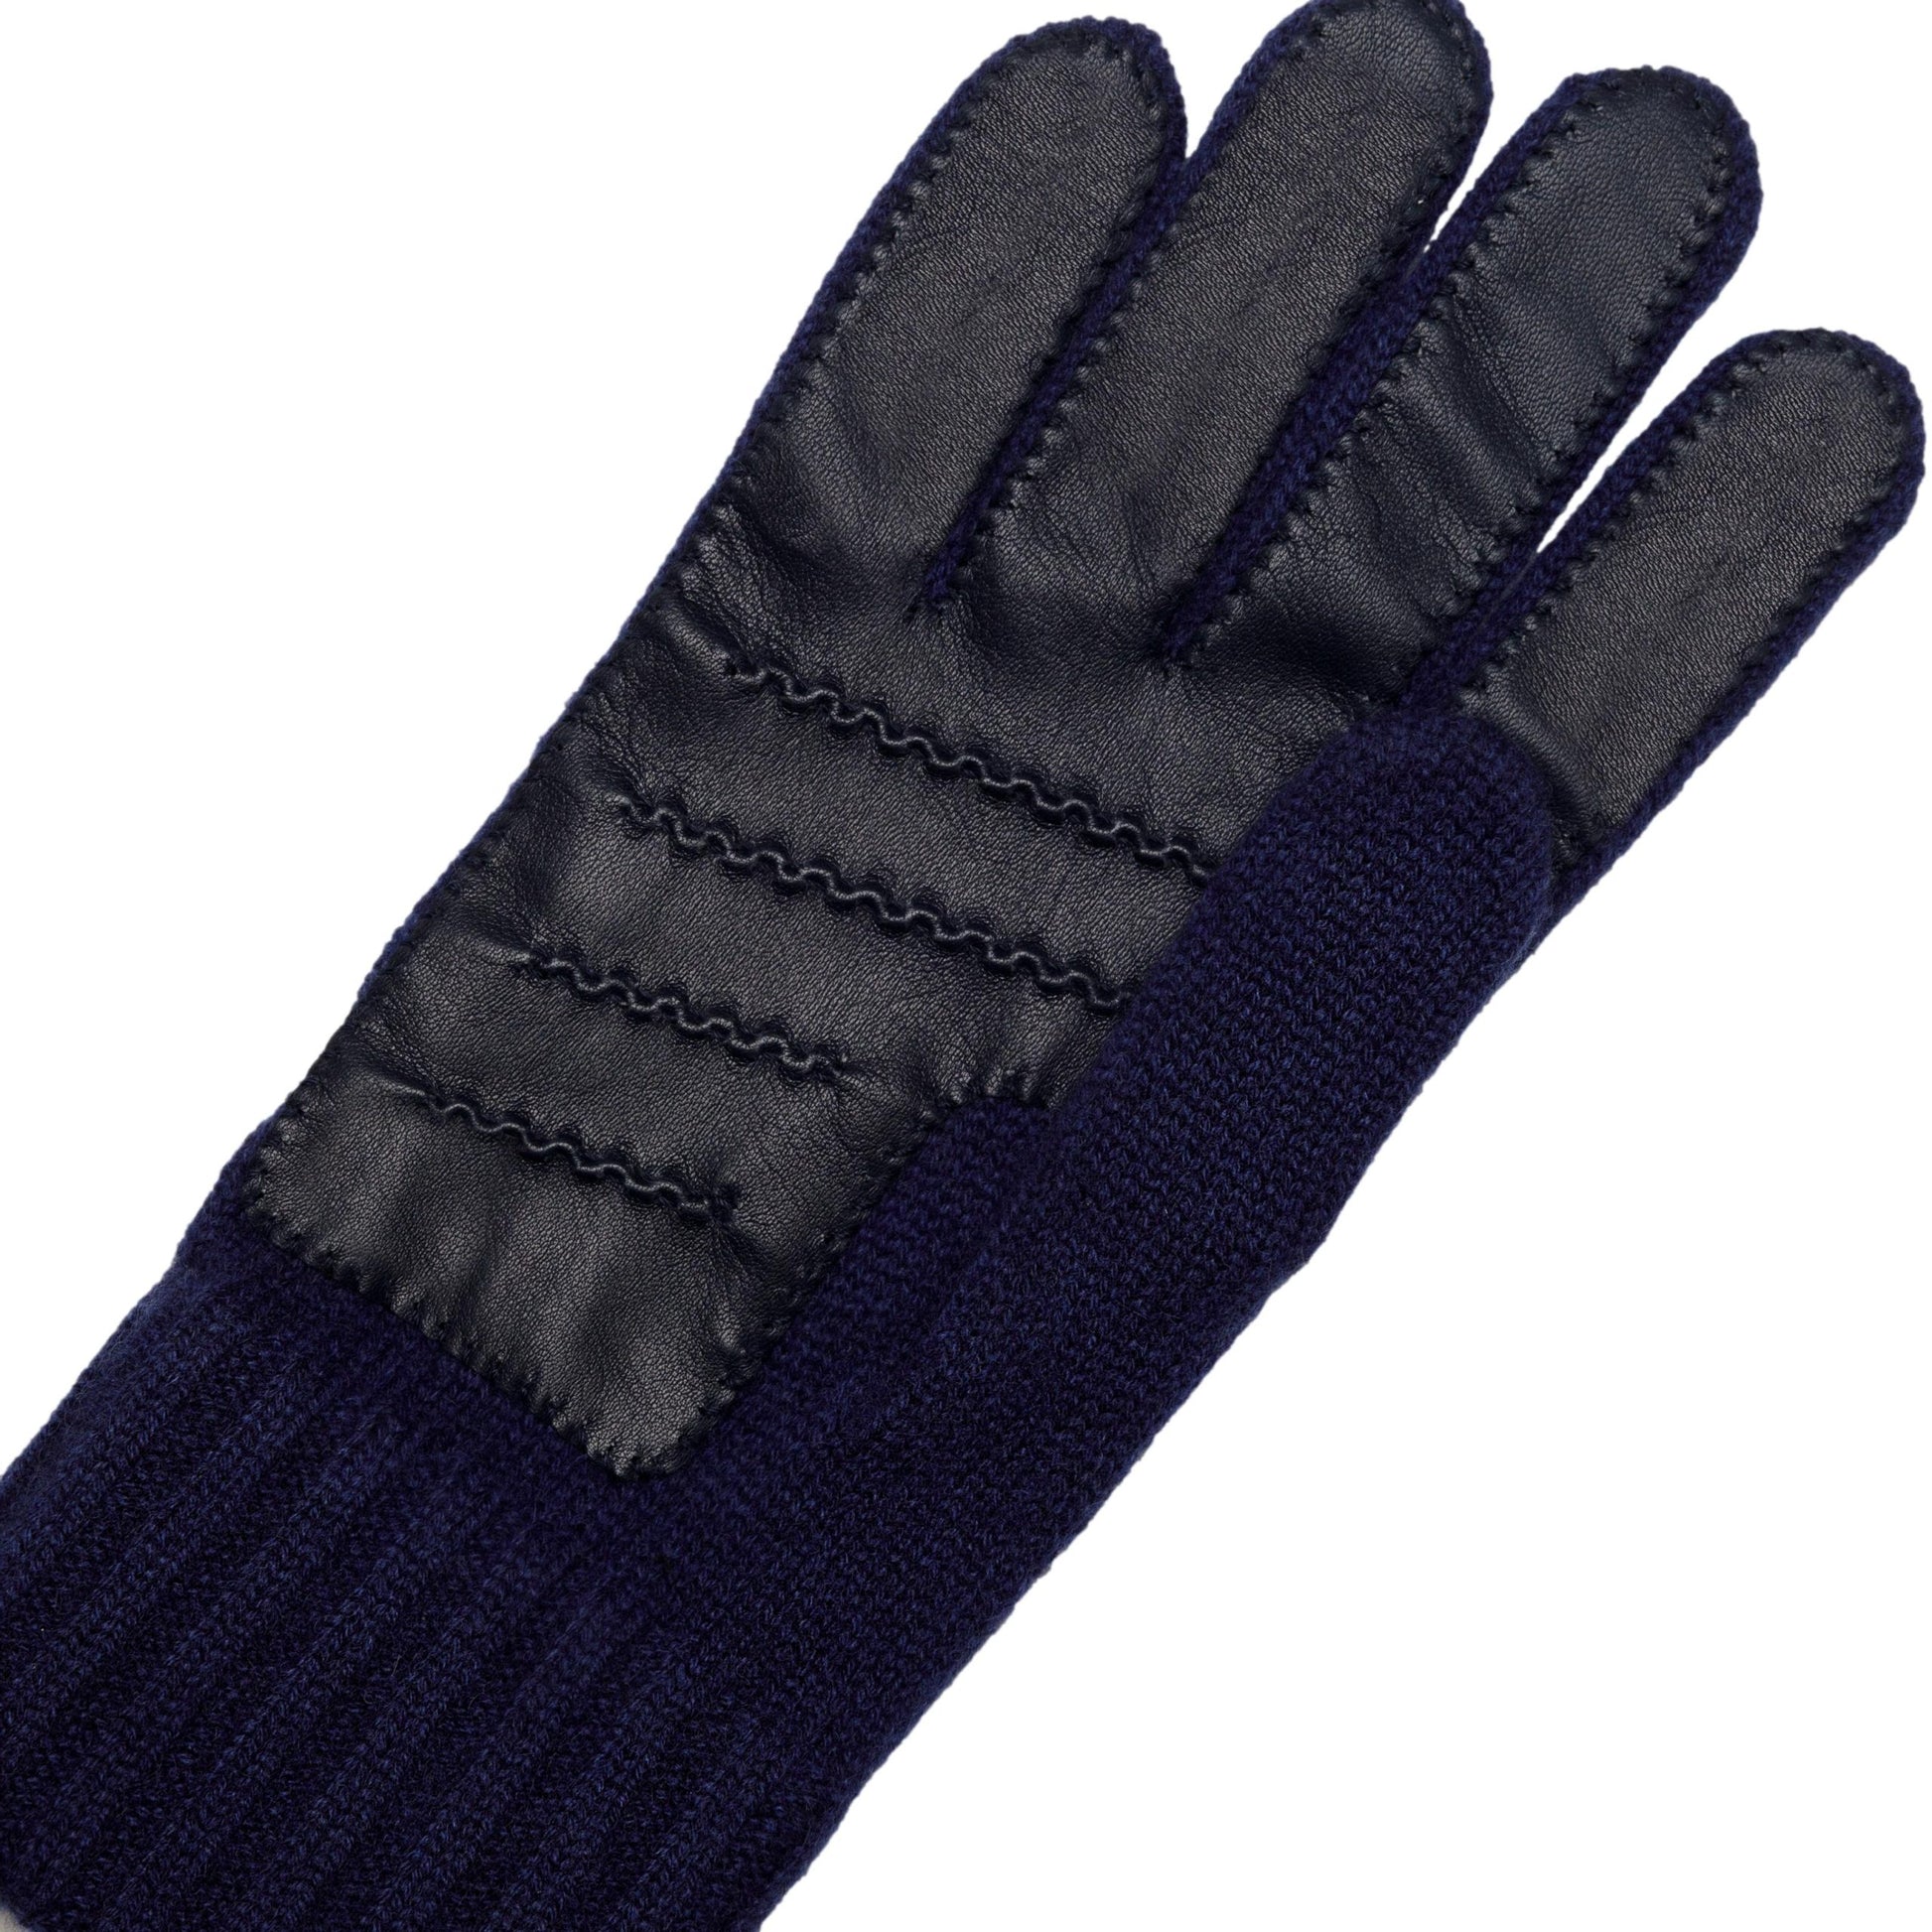 Men's natural blue cashmere gloves with chrome-free leather palm patch detail